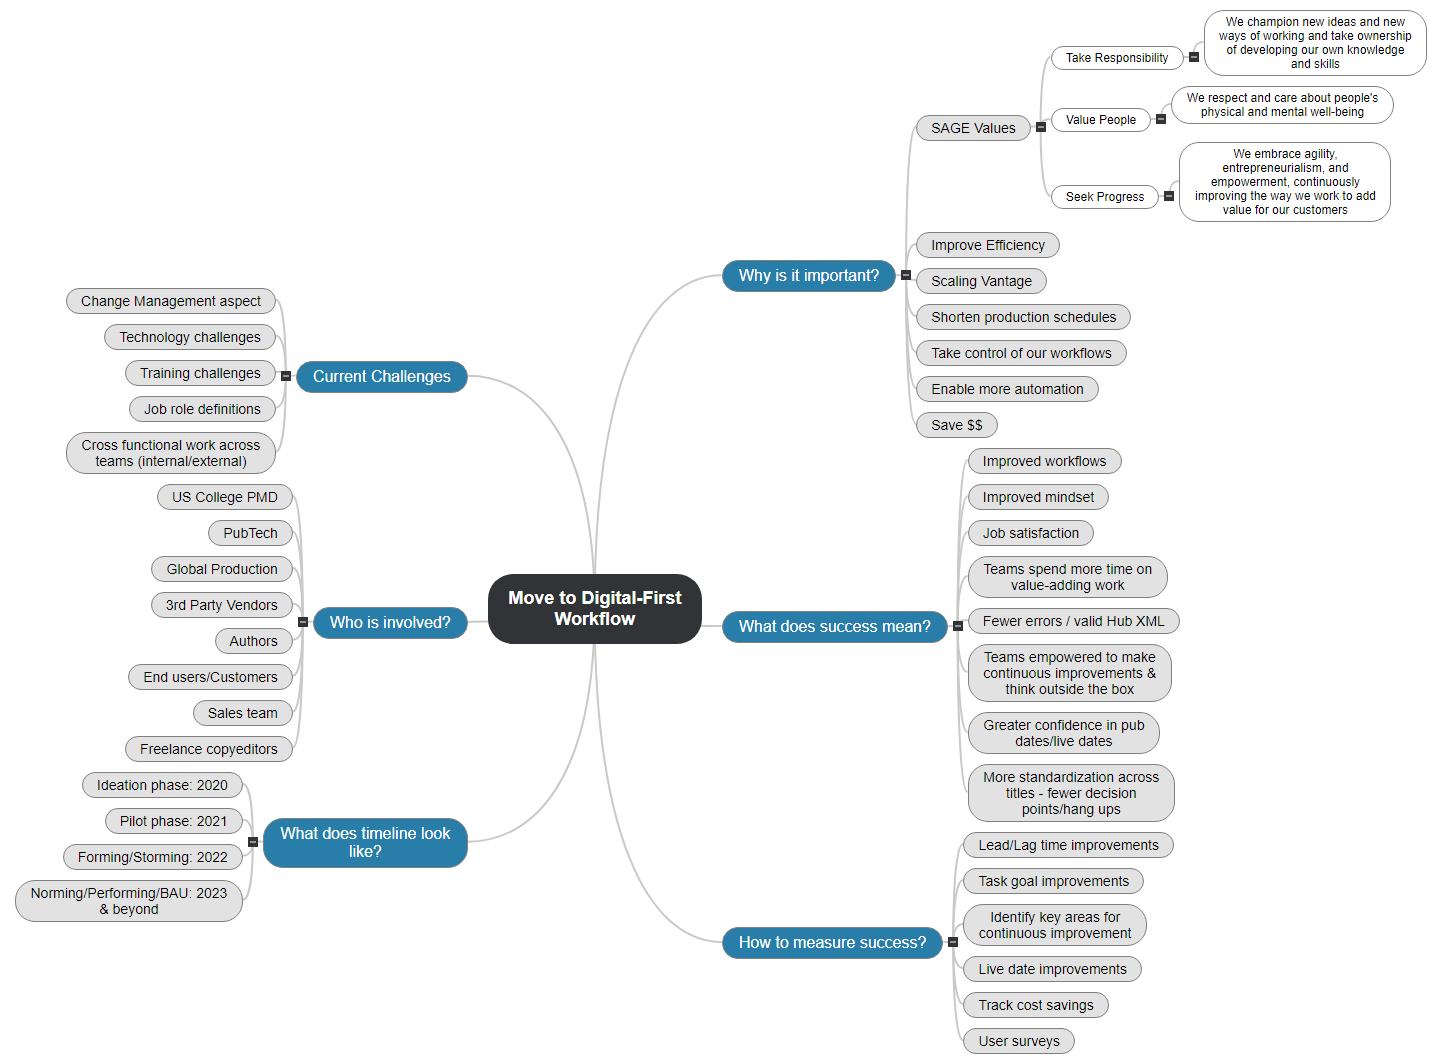 Move to Digital-First Workflow Mind Map